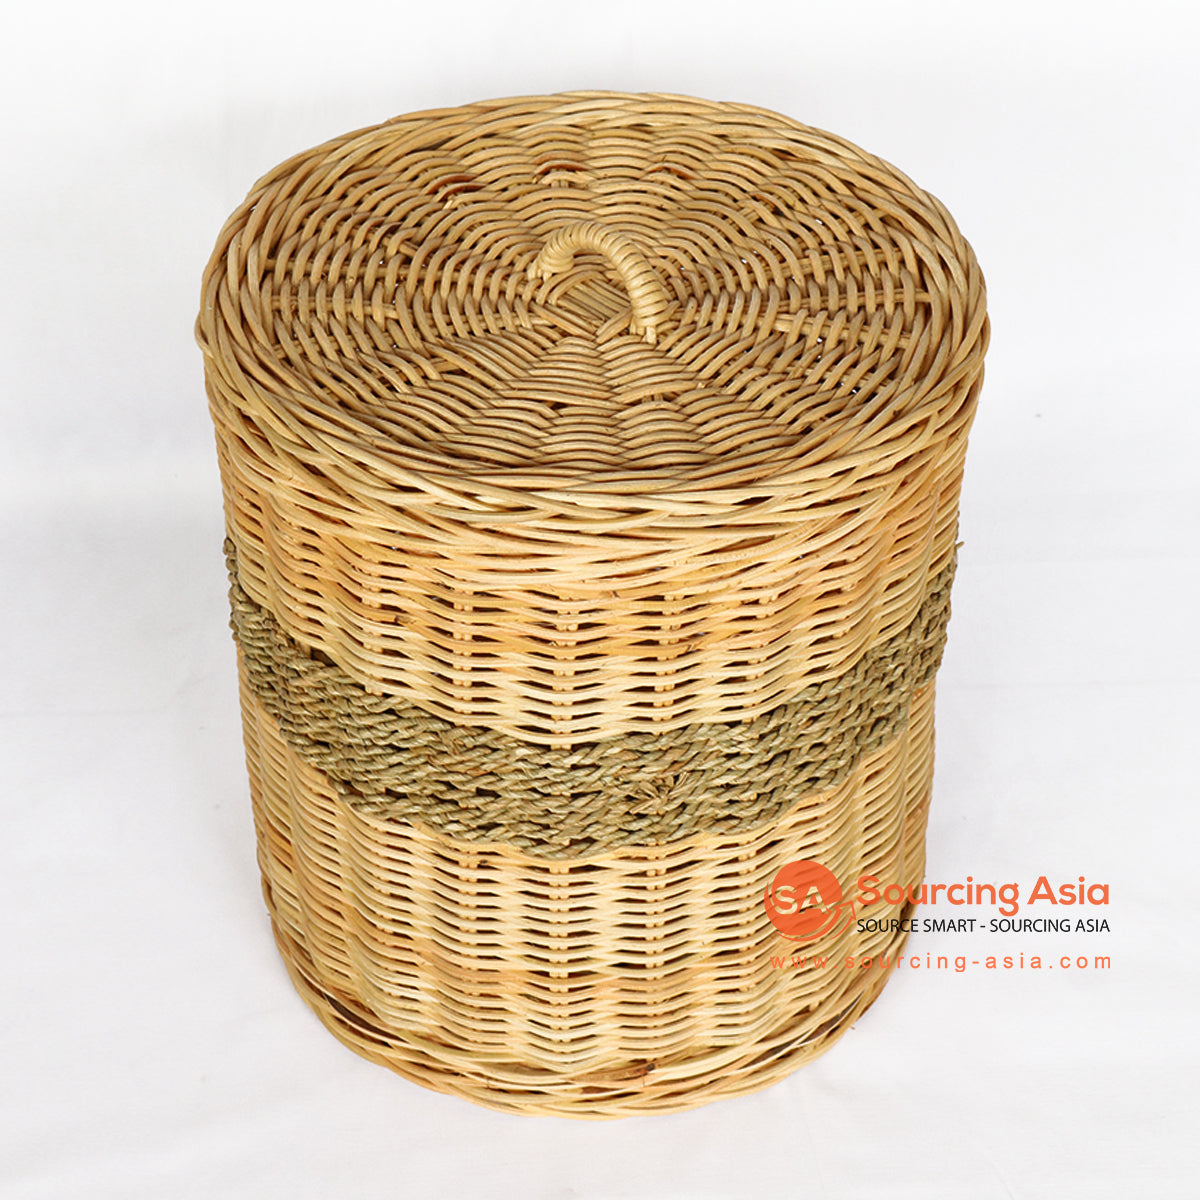 BNTC007-6 NATURAL RATTAN DECORATIVE BASKET WITH LID